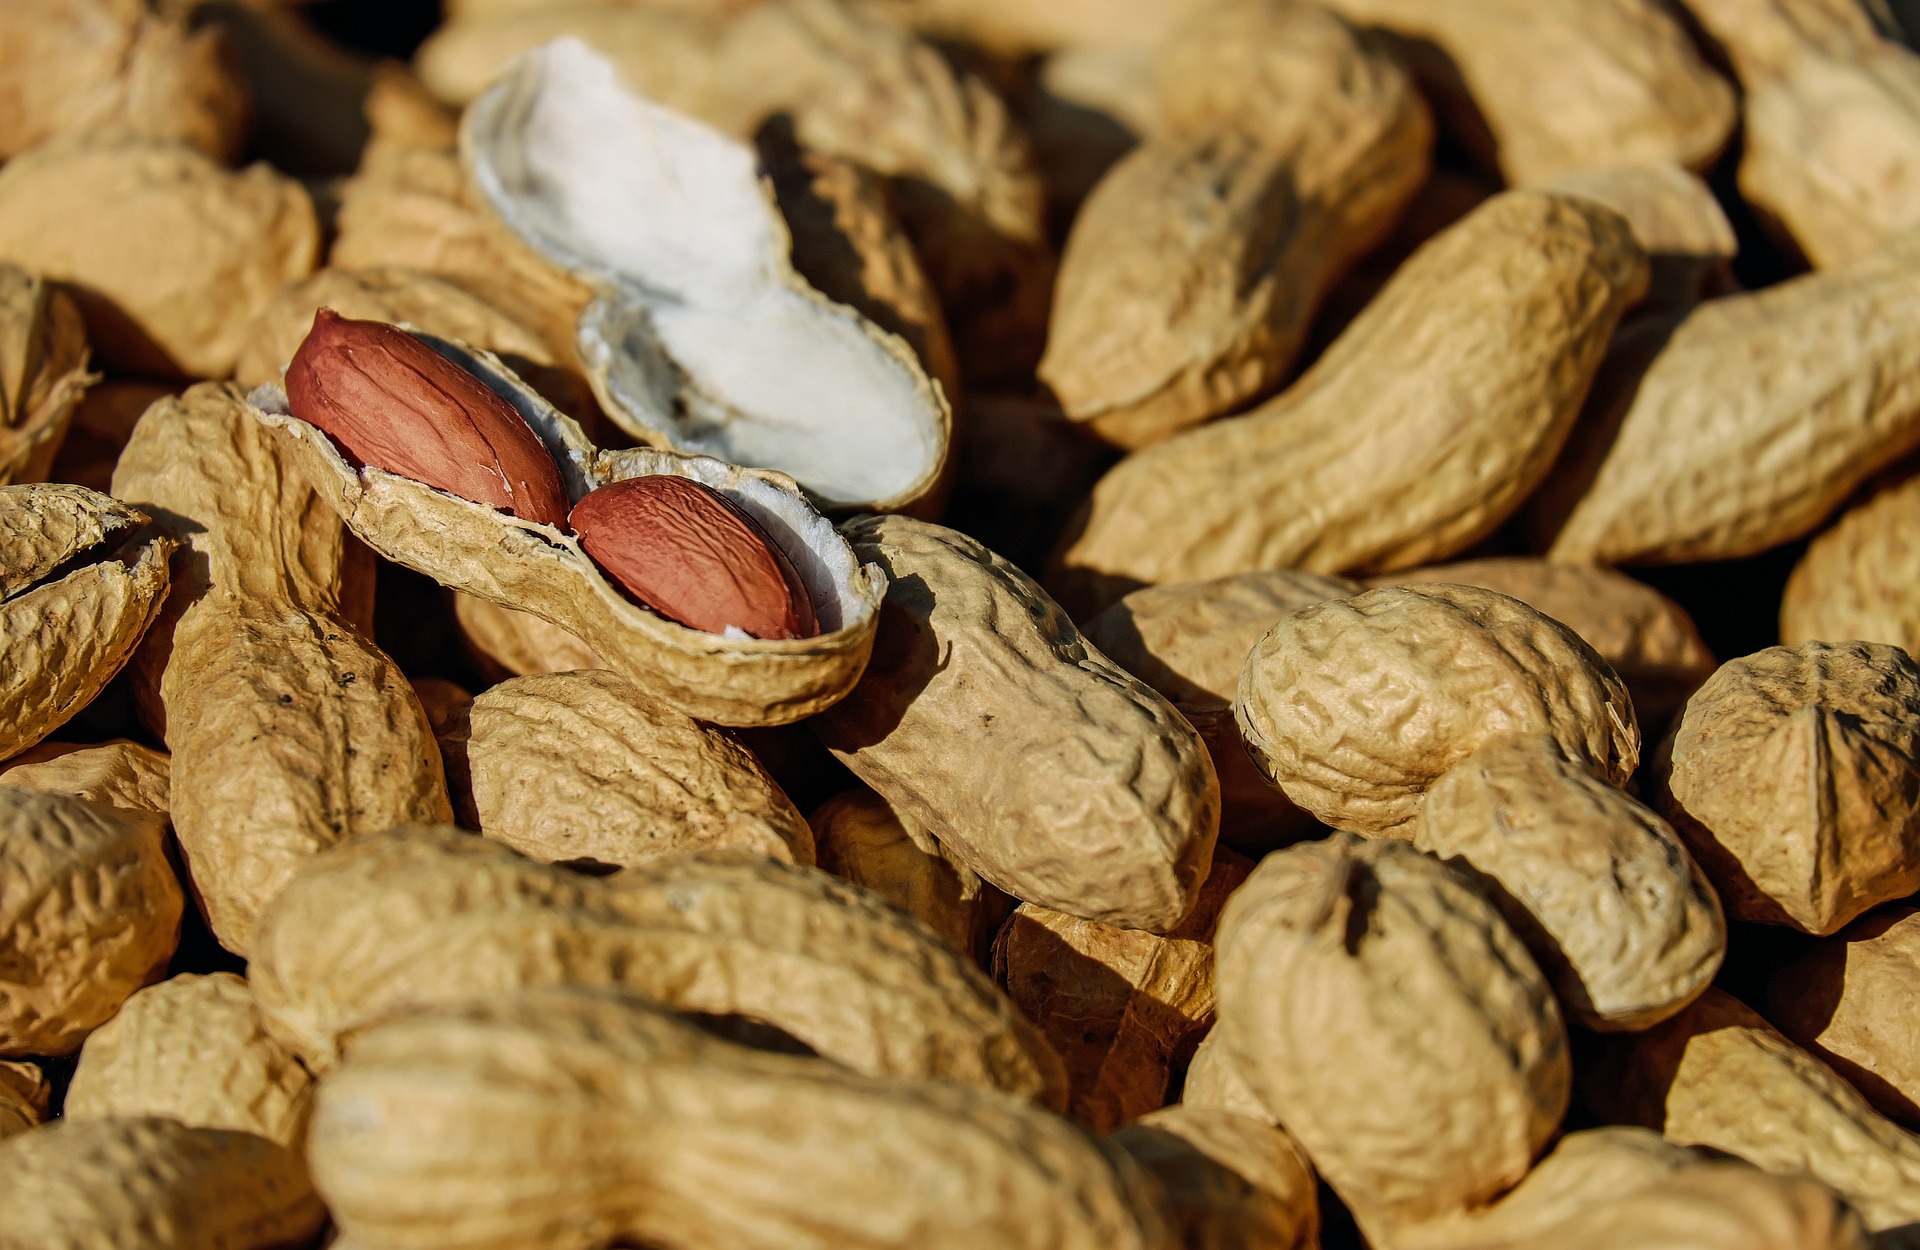 A pile of peanuts; our No Win No Fee Solicitors discuss making a compensation claim for peanut allergies.